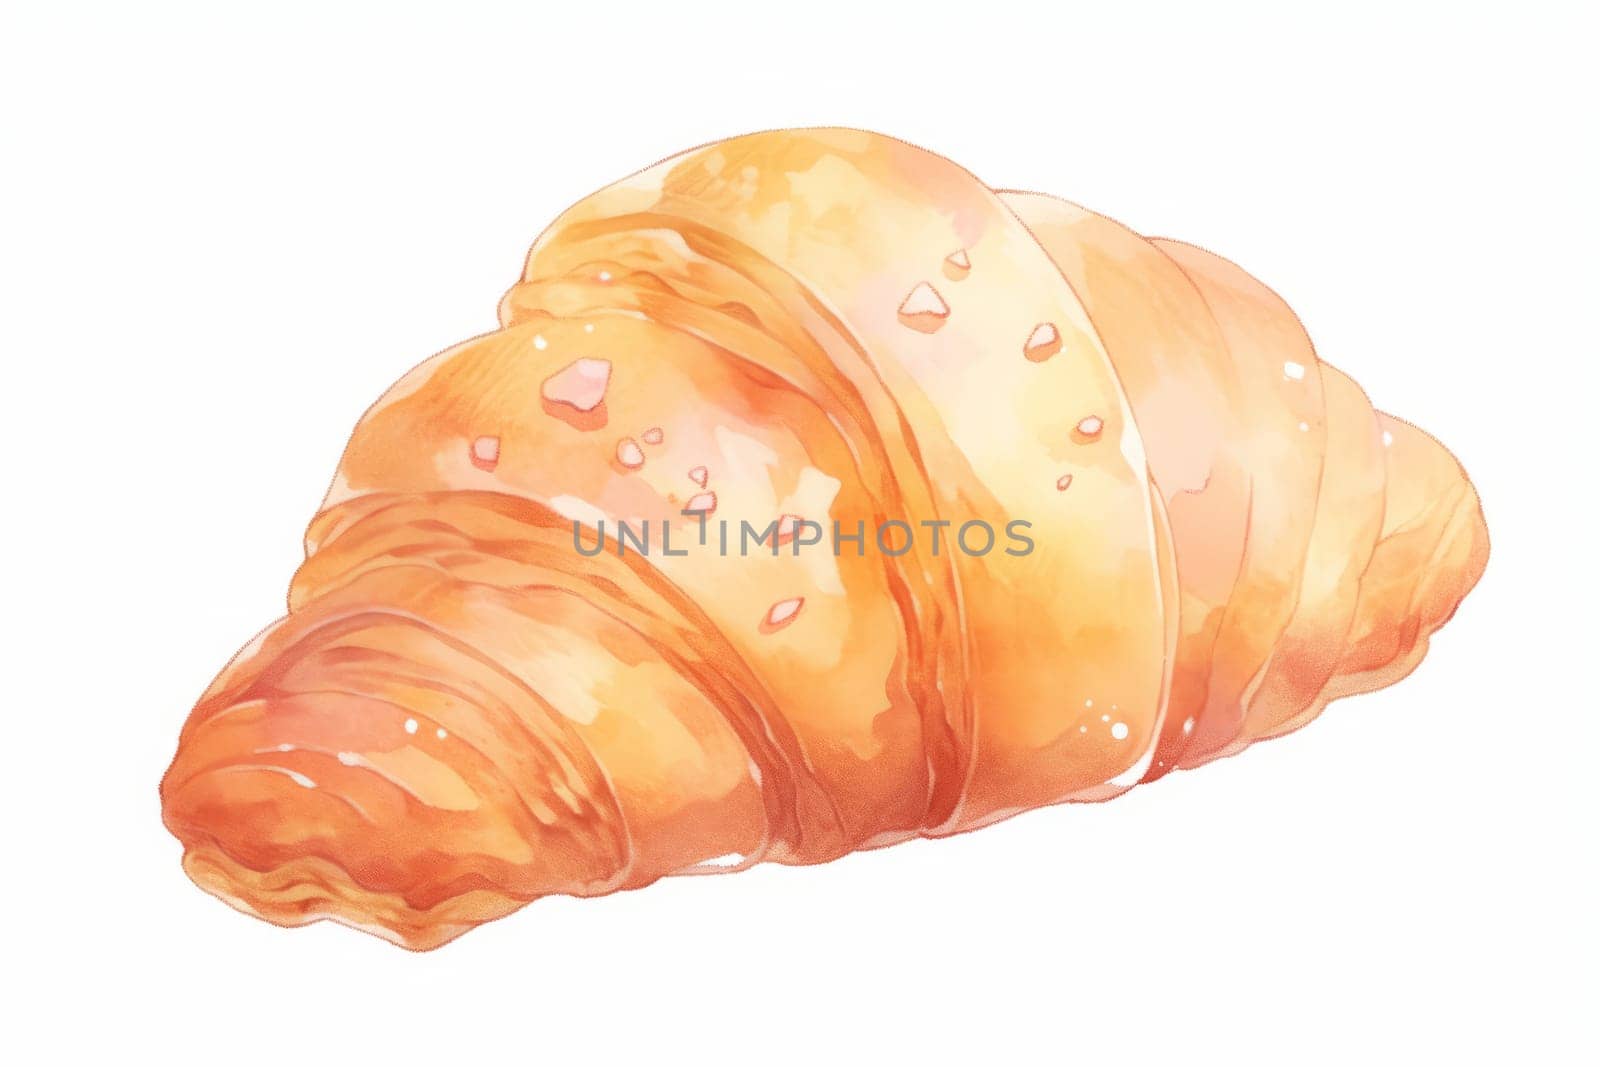 French croissant hand drawn watercolor illustration